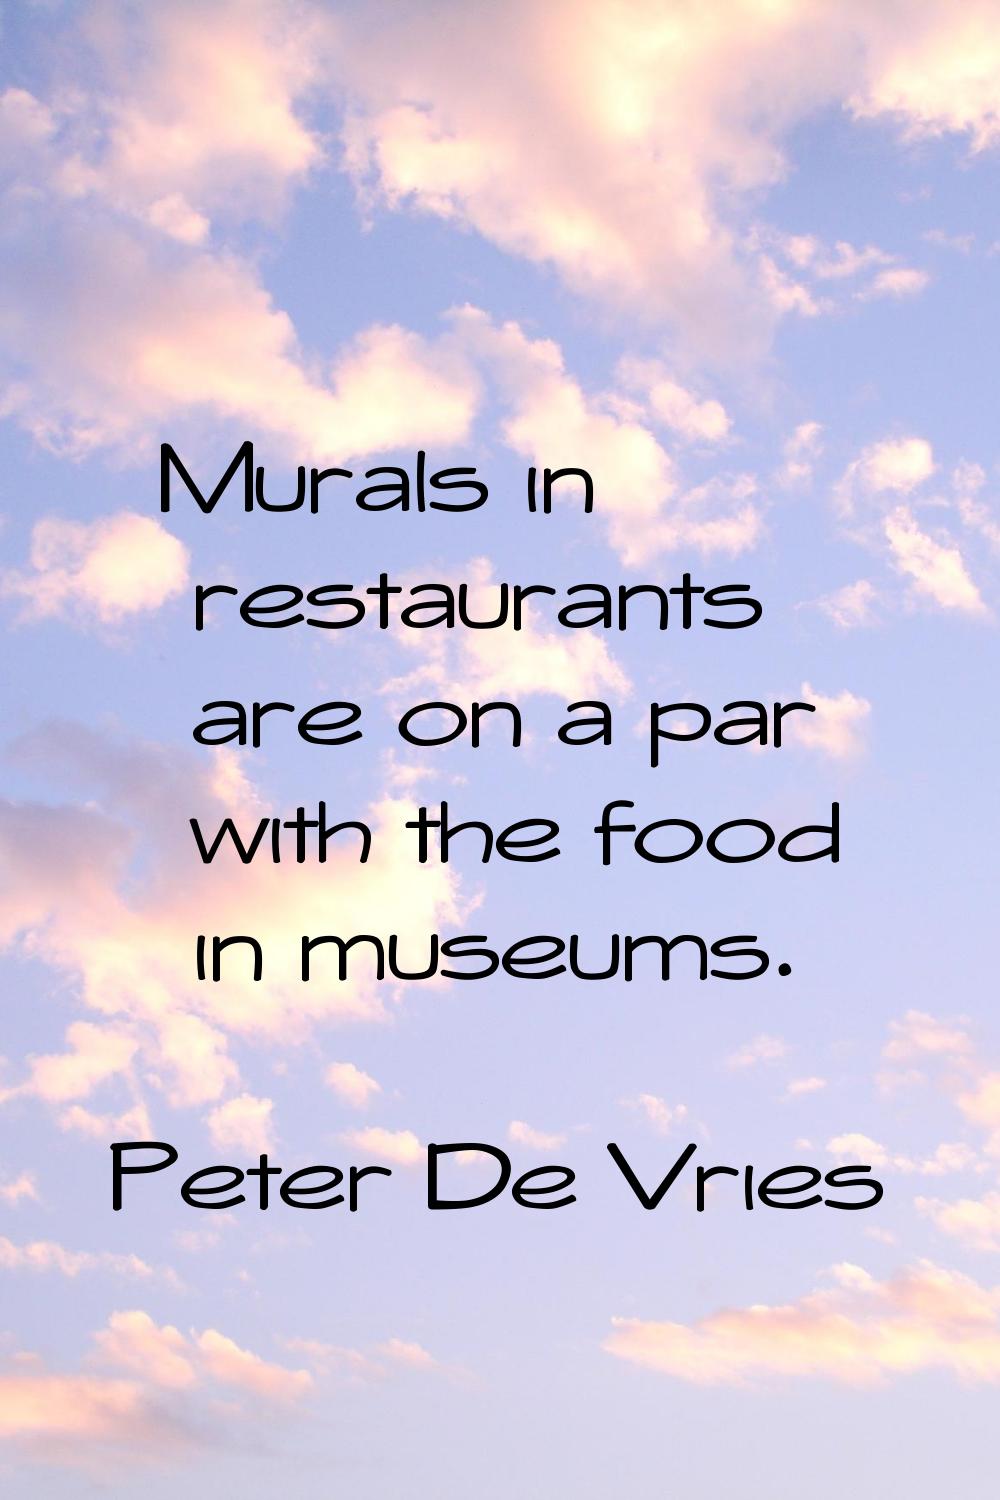 Murals in restaurants are on a par with the food in museums.